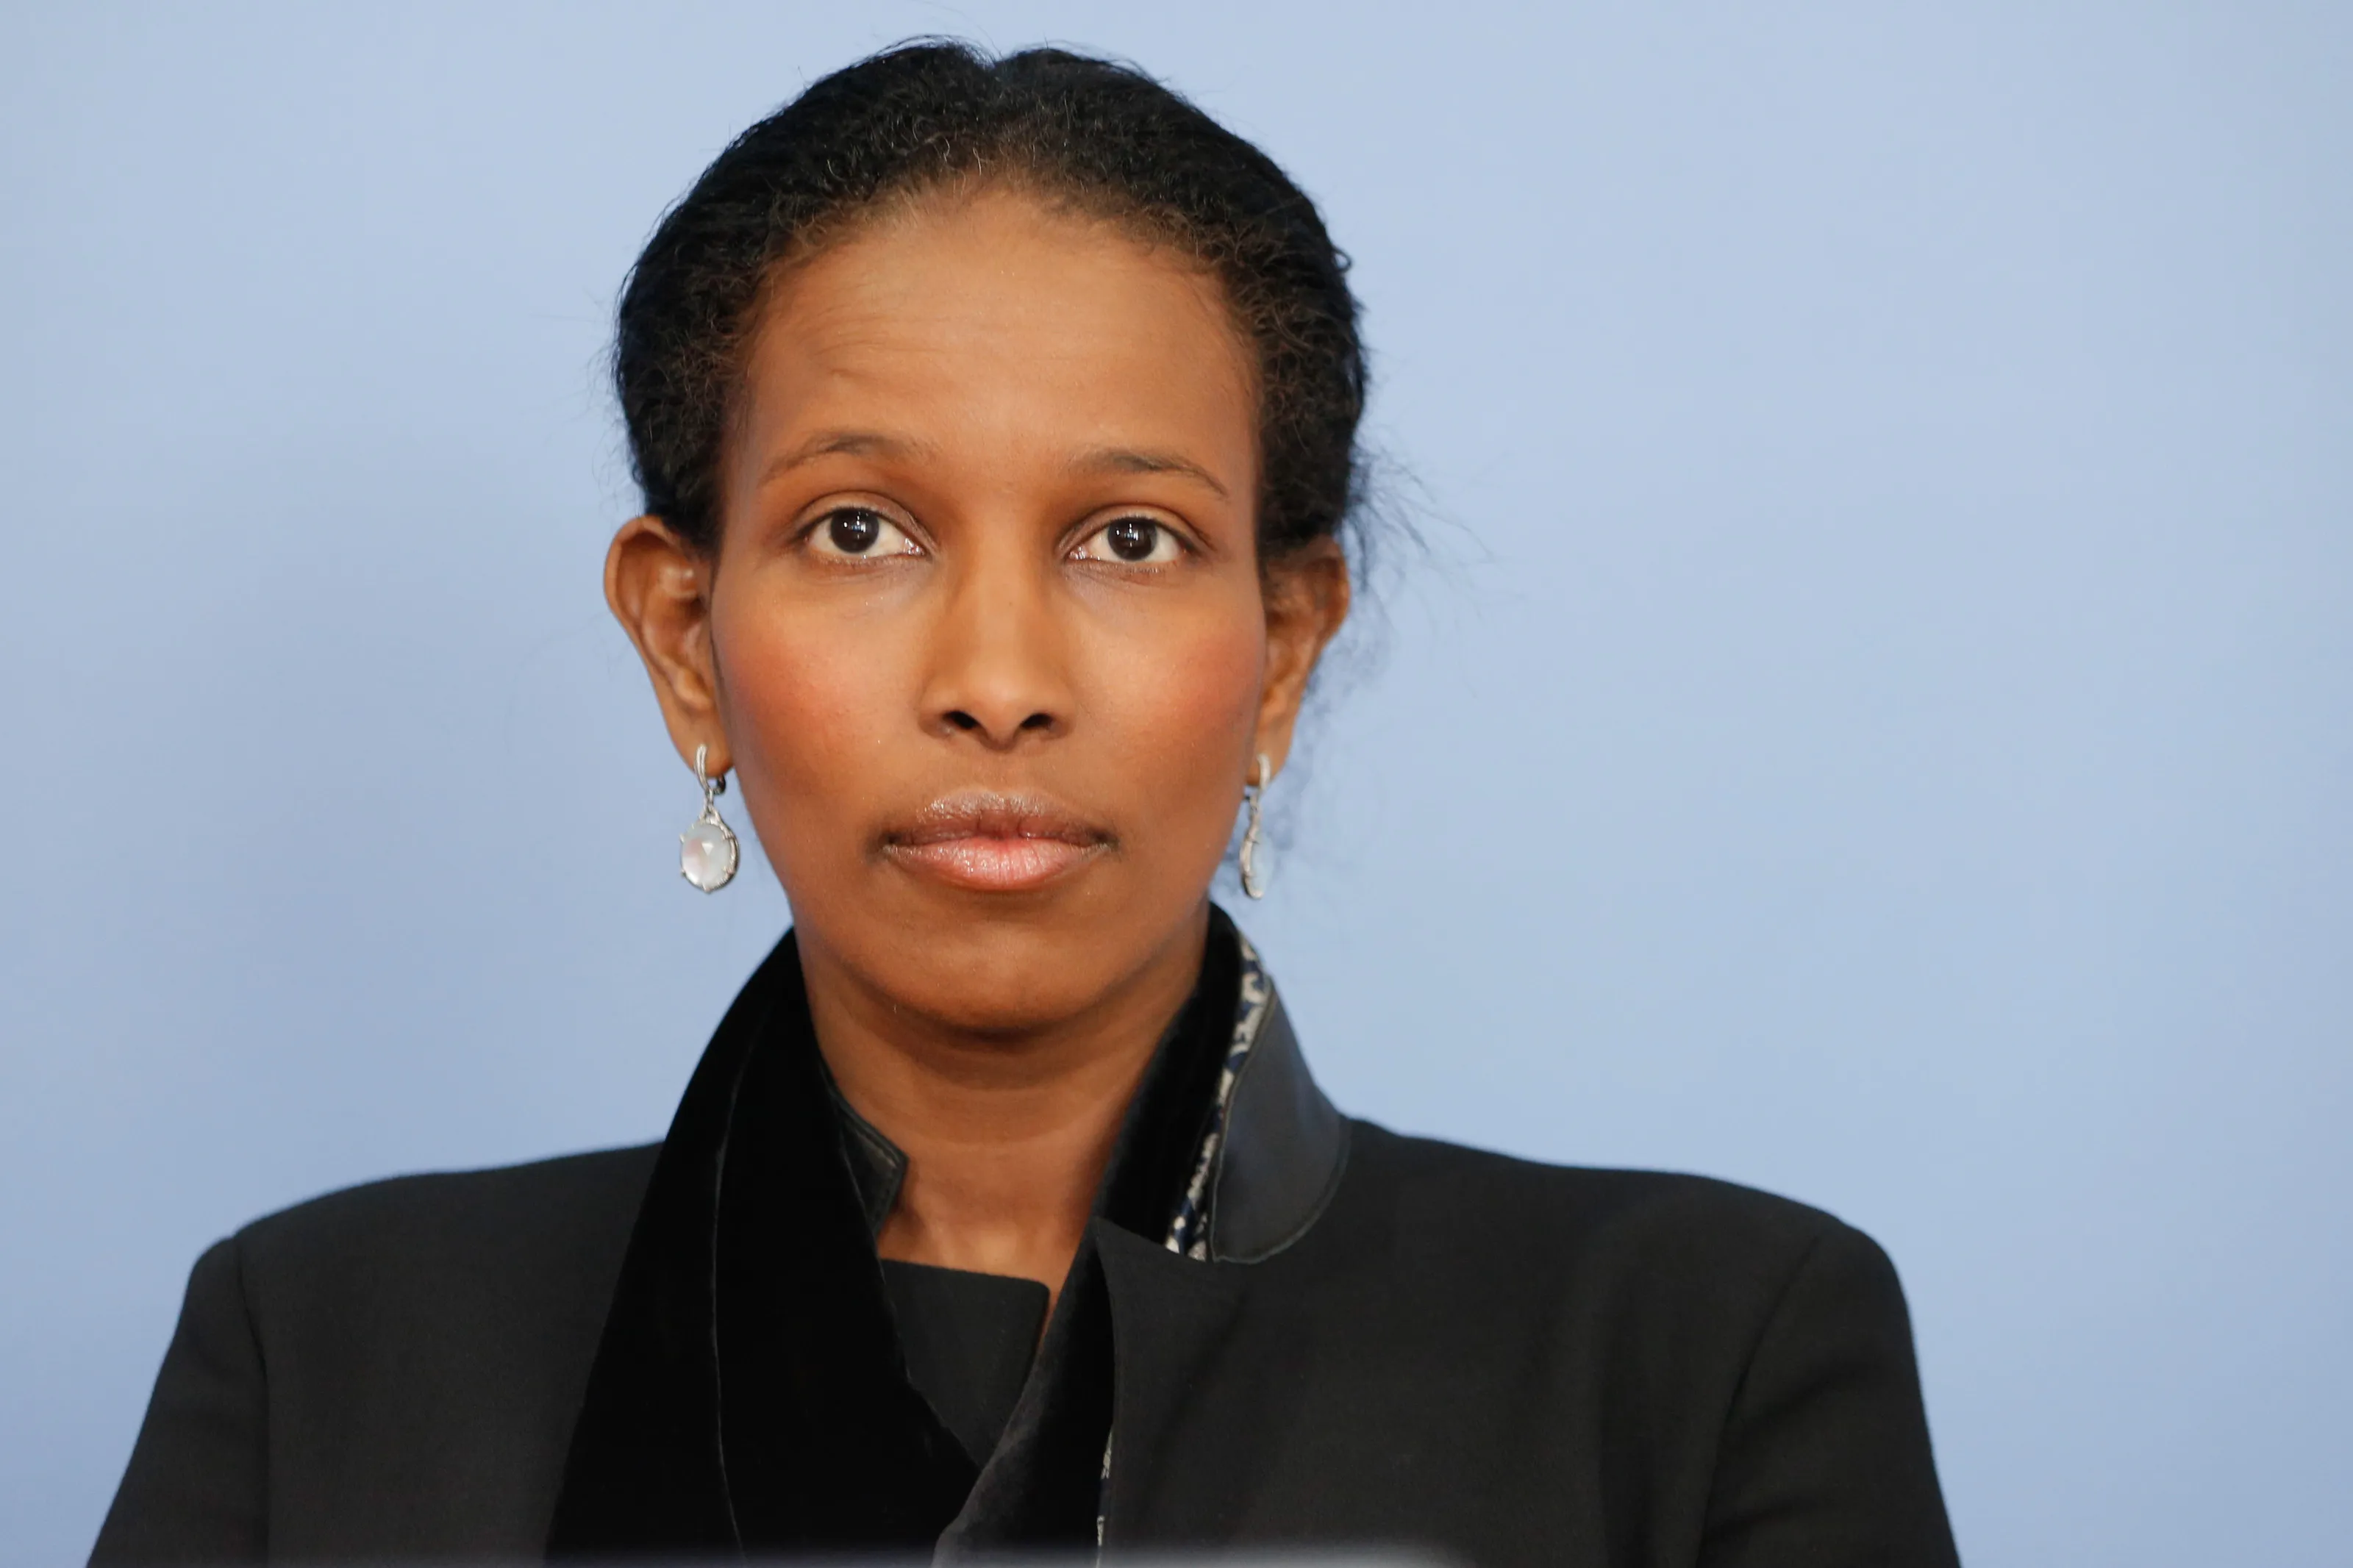 Ayaan Hirsi Ali is a Somalia-born American activist, writer, and politician and is known for her views critical of Islam and supportive of women's rights.?w=200&h=150